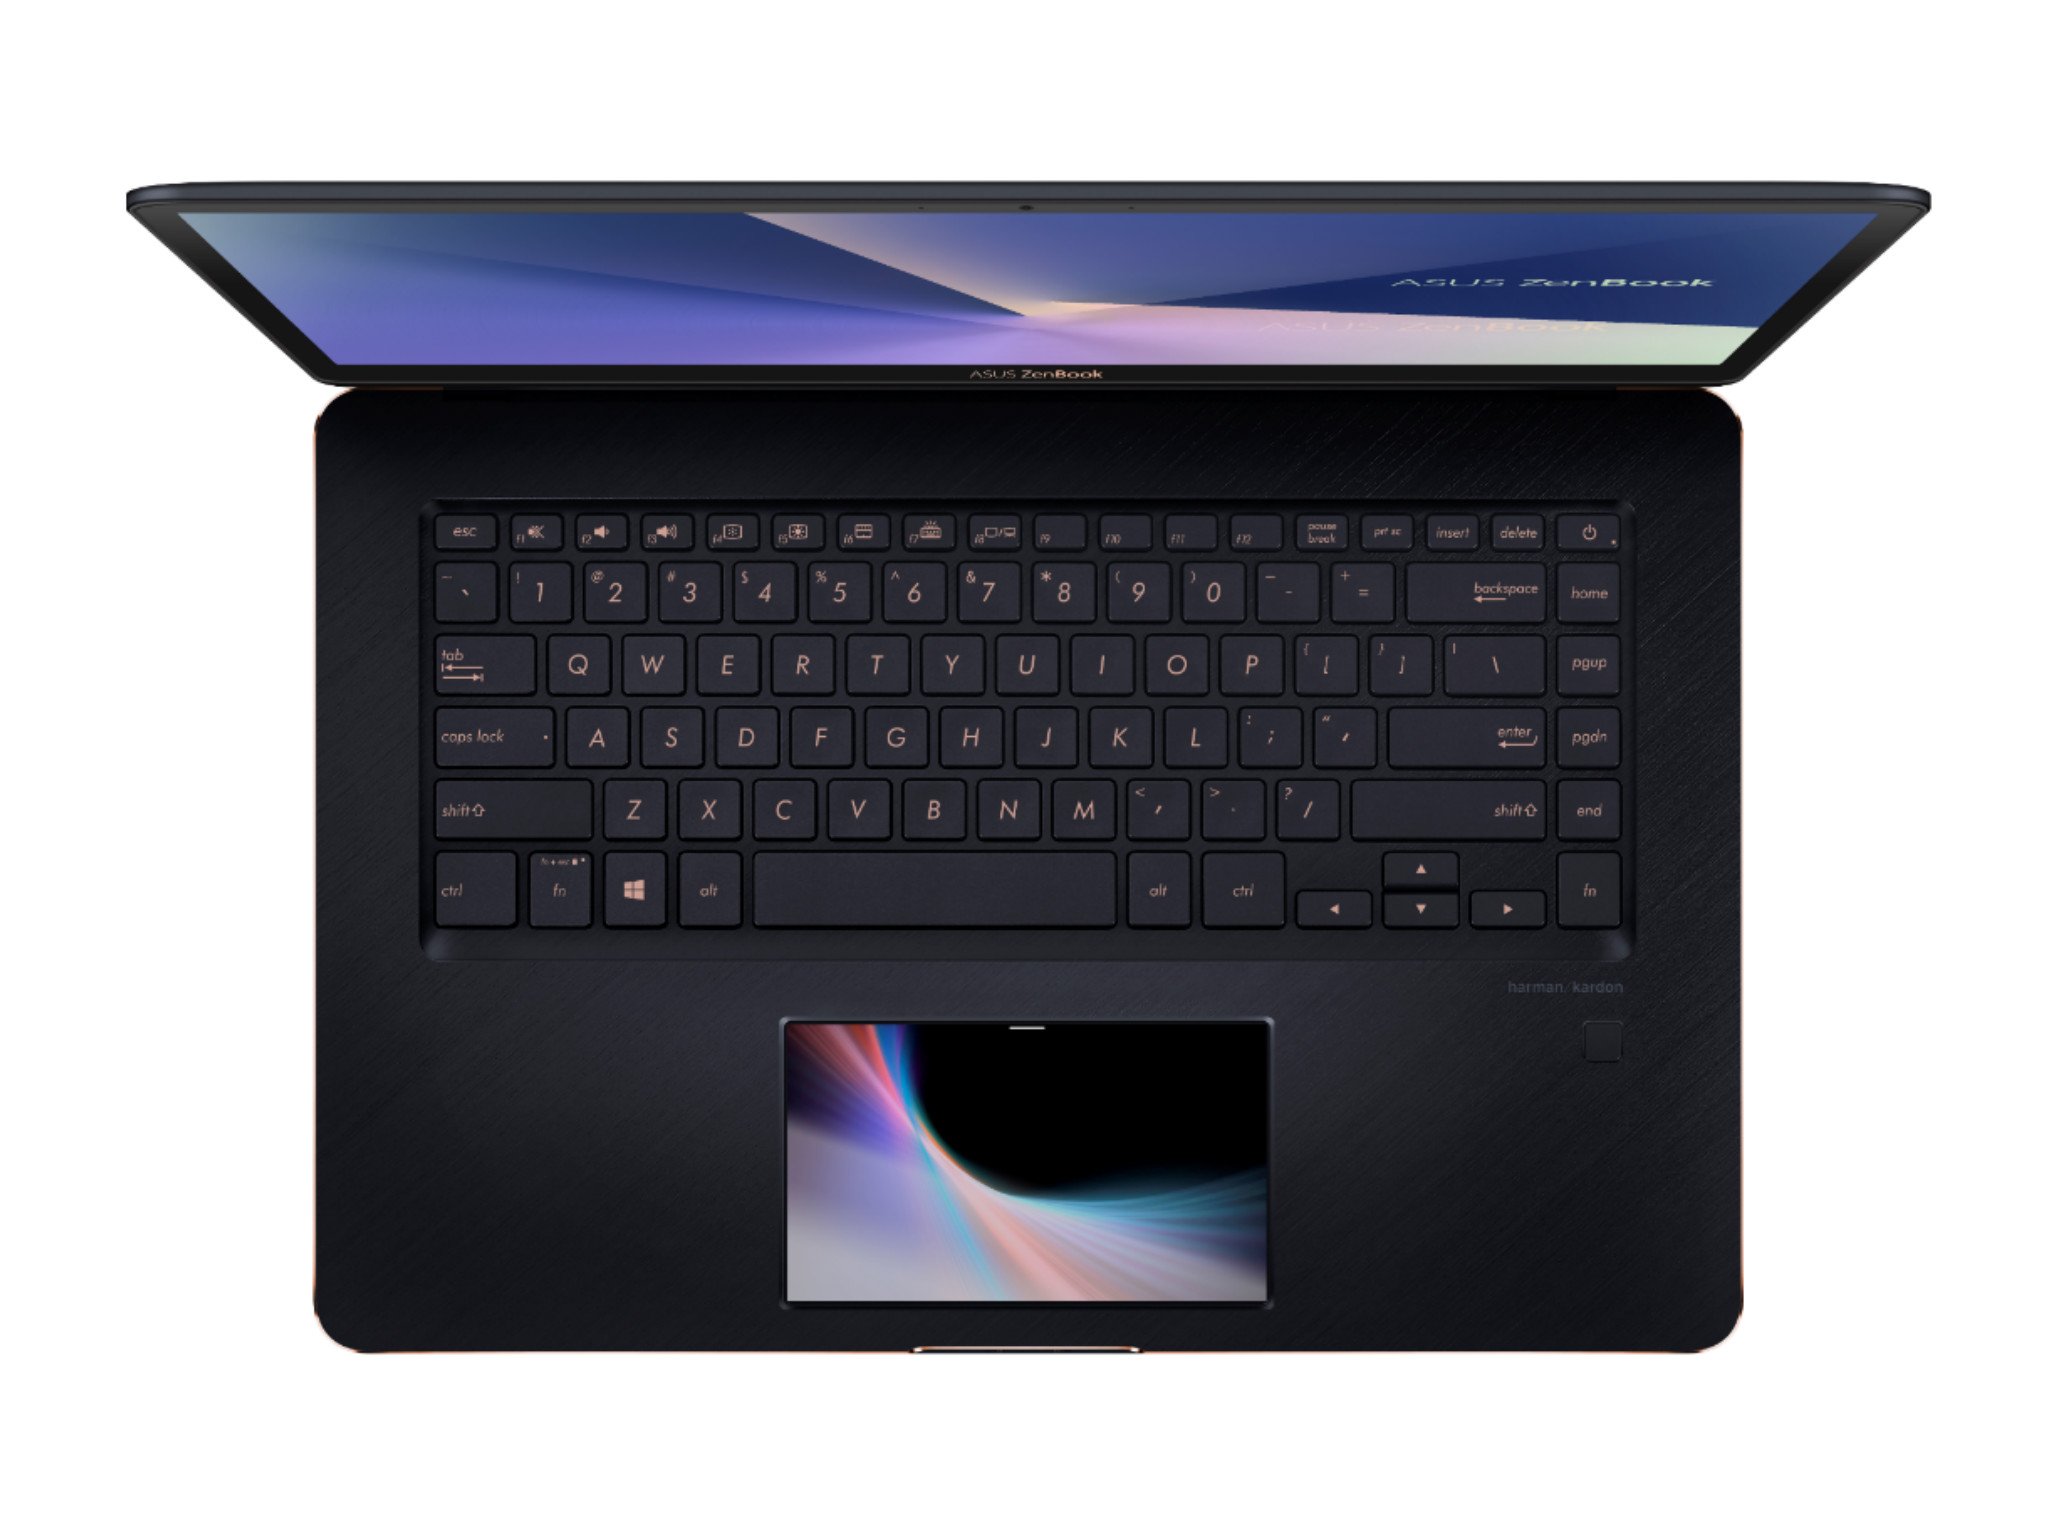 ASUS ZenBook Pro 15 with ScreenPad now available